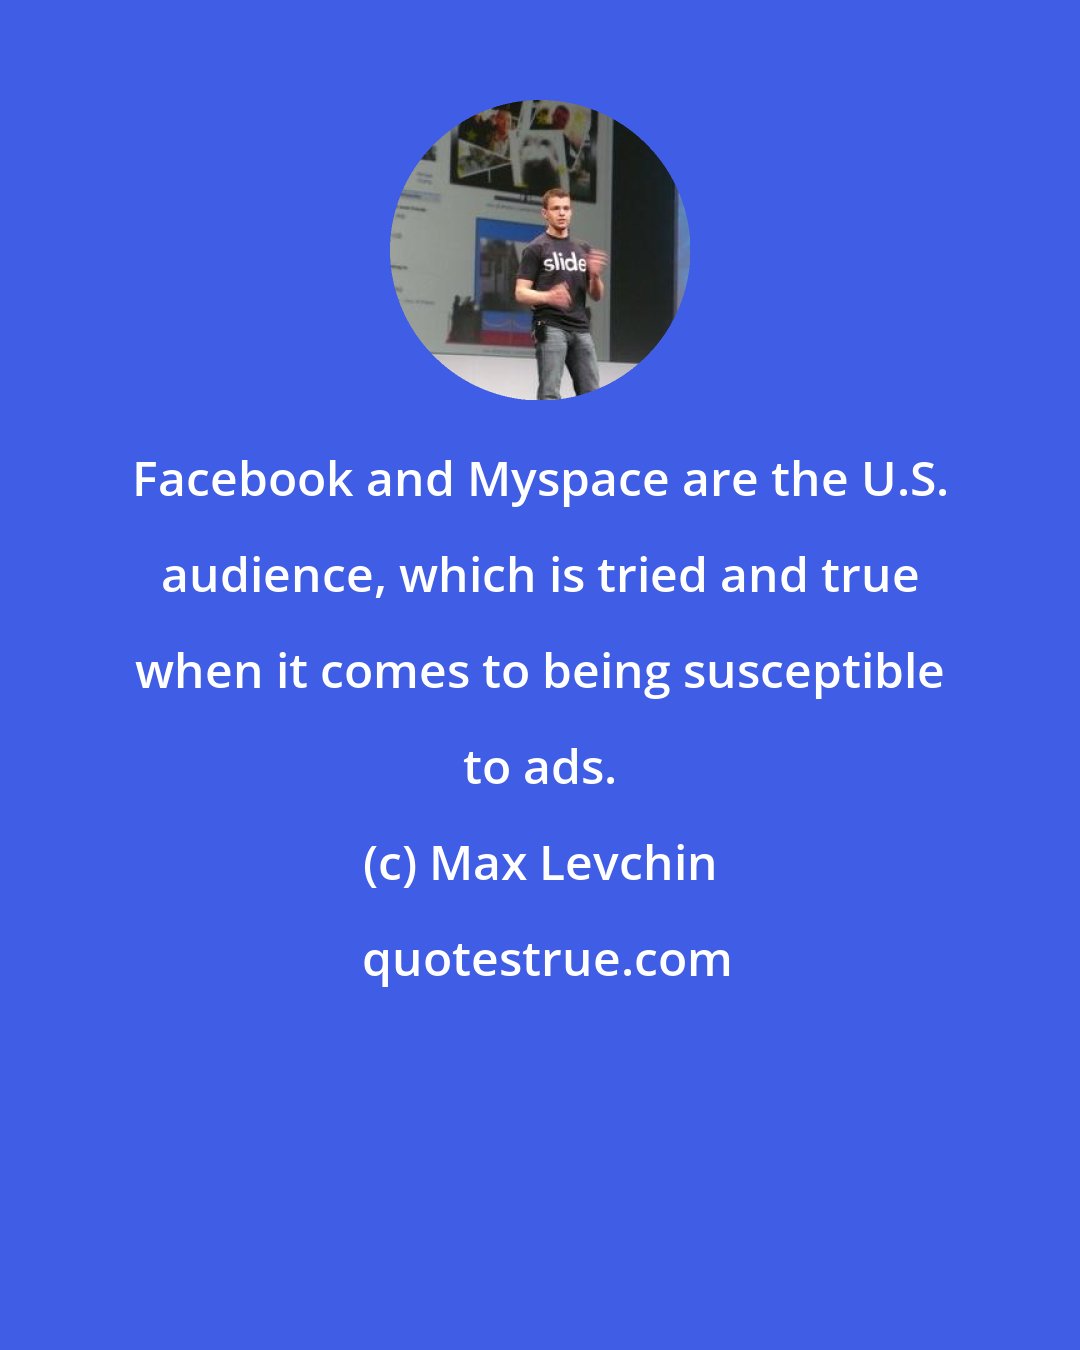 Max Levchin: Facebook and Myspace are the U.S. audience, which is tried and true when it comes to being susceptible to ads.